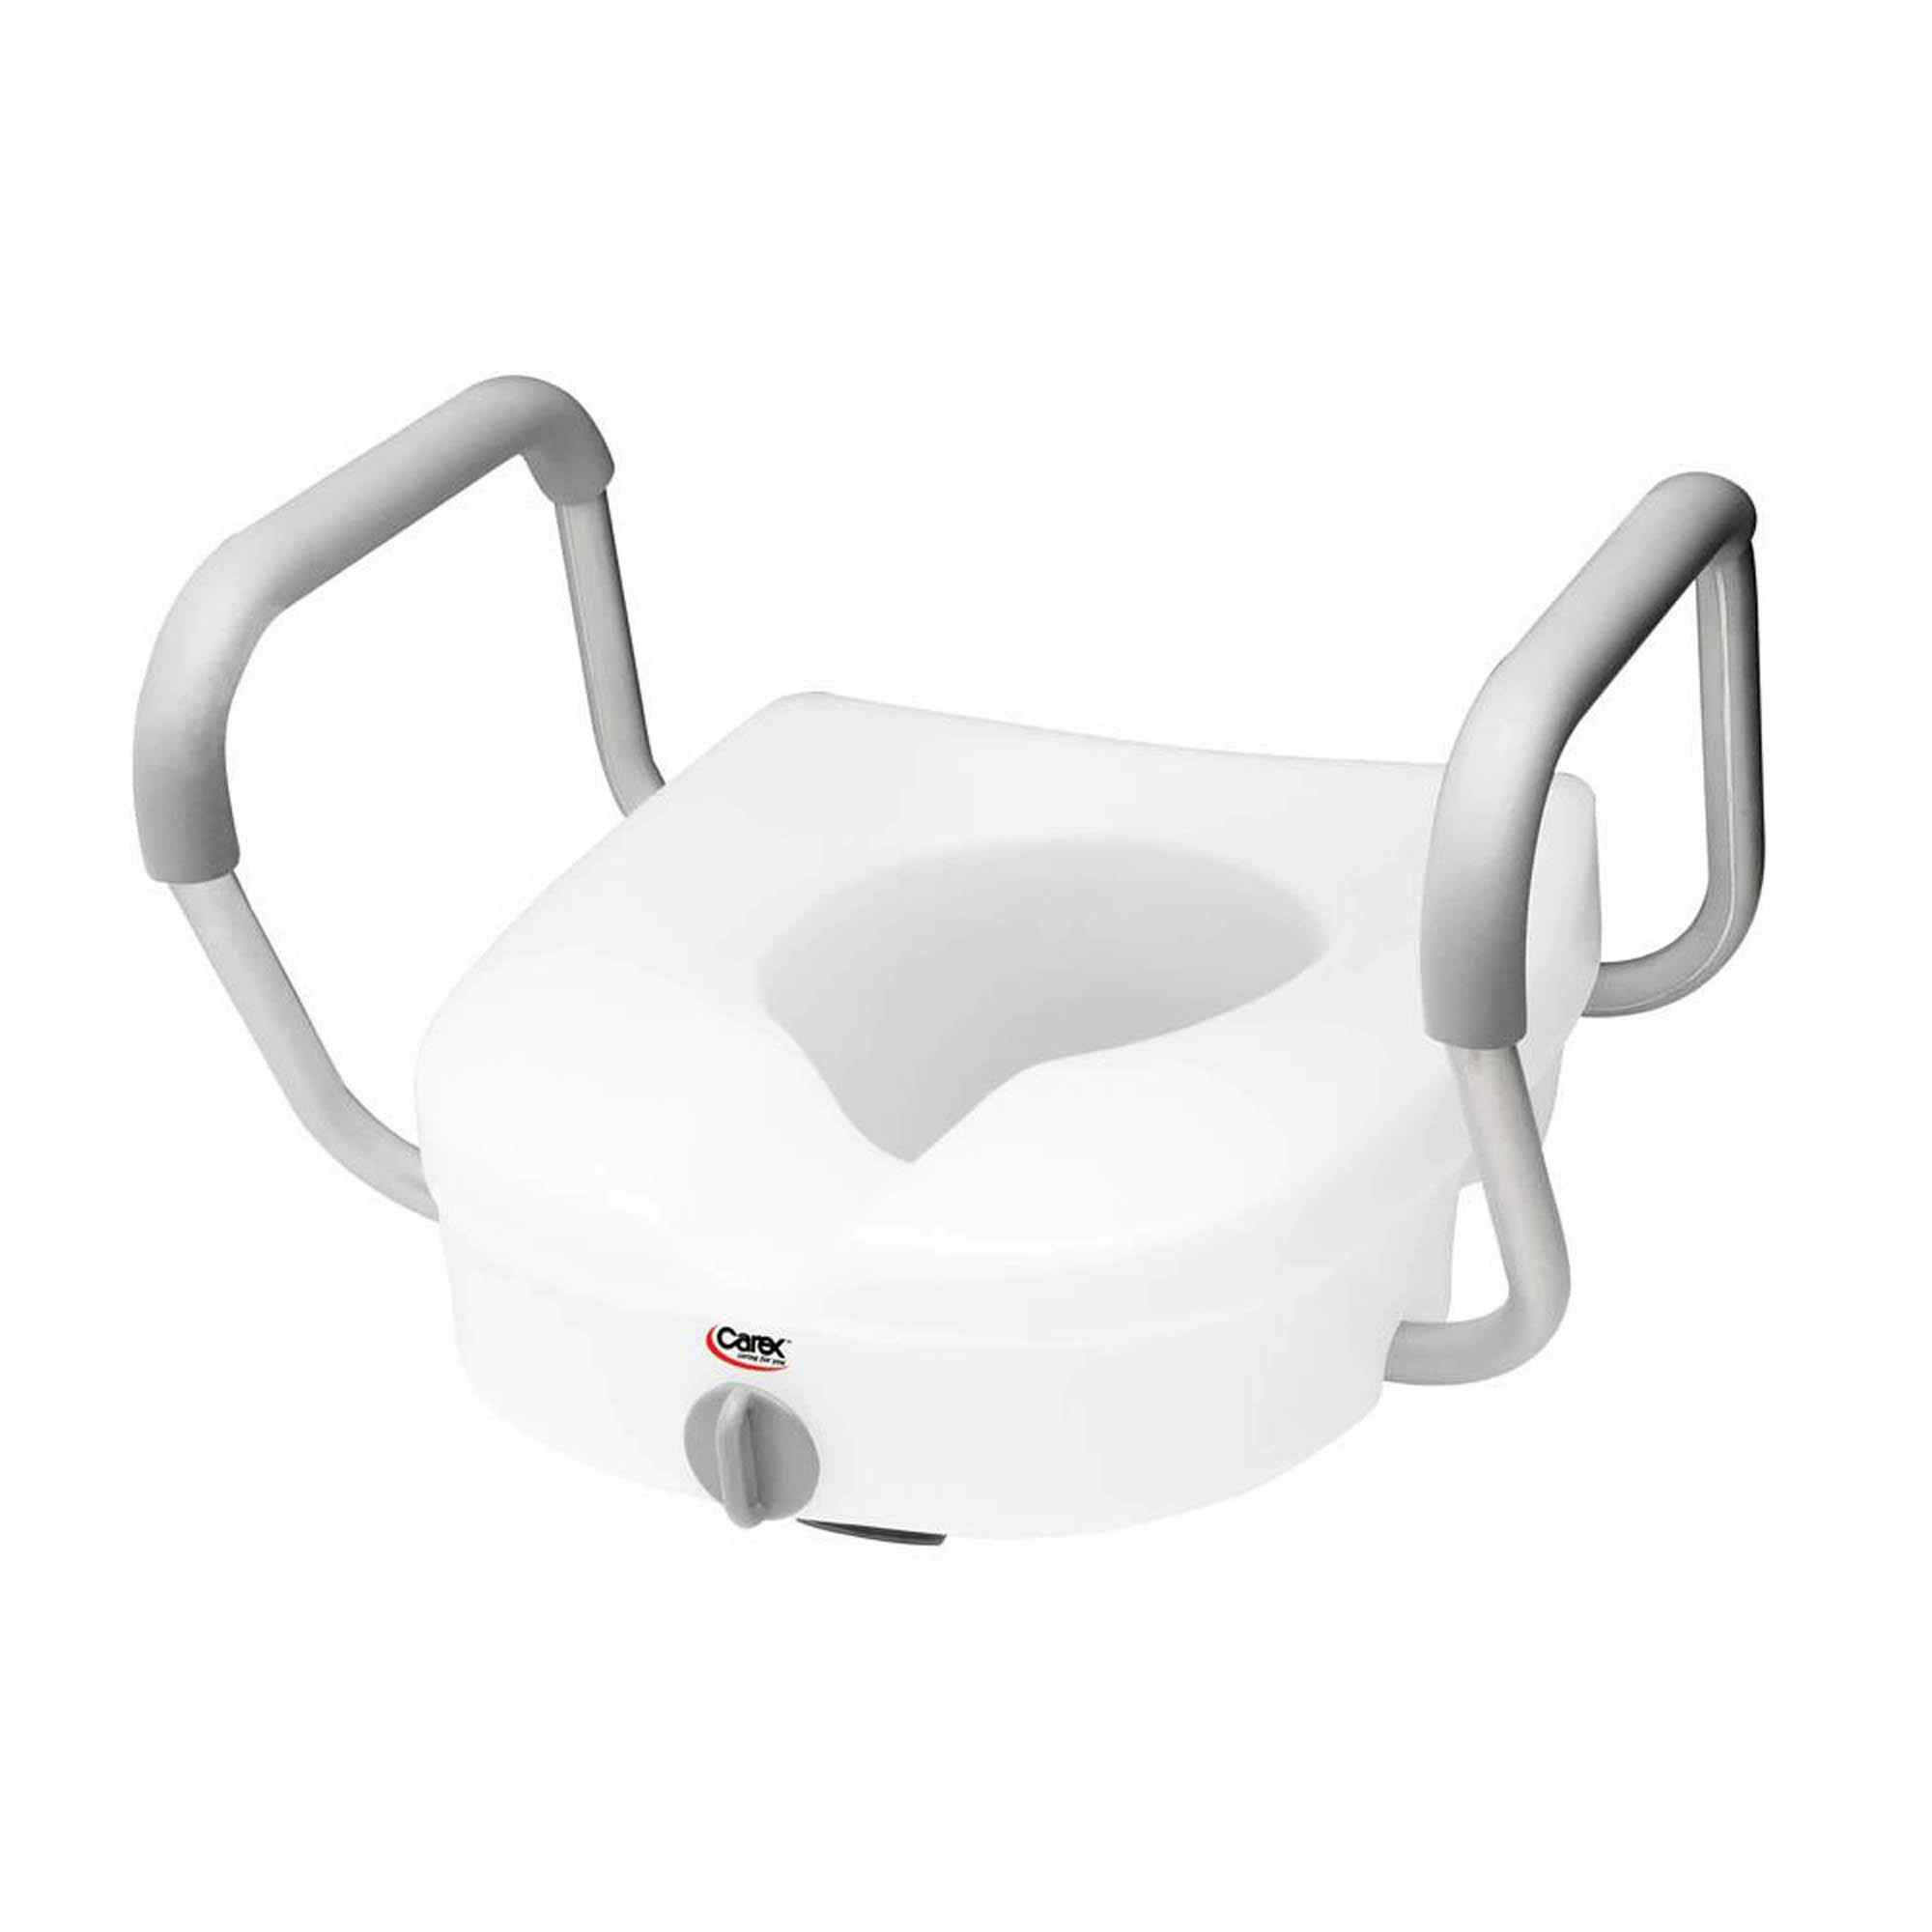 Carex E-Z Lock Raised Toilet Seat with Armrests, FGB311C00000, 1 Each